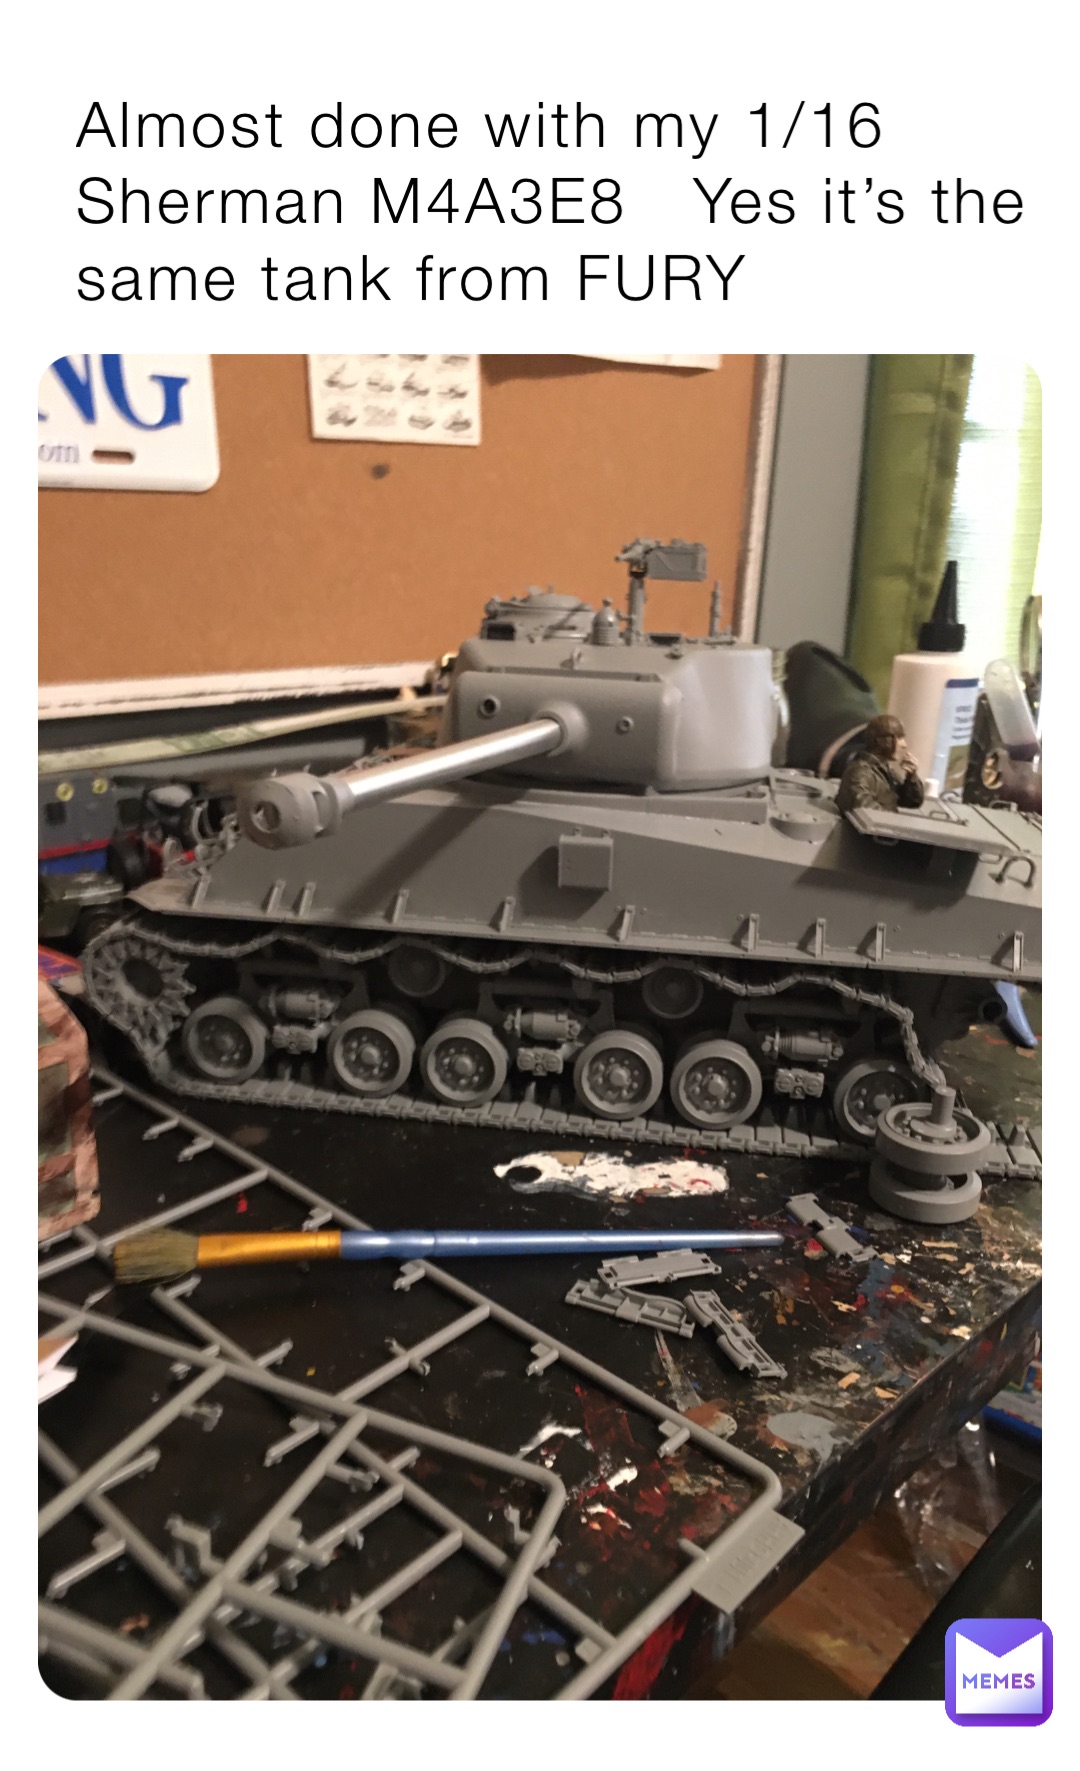 Almost done with my 1/16 Sherman M4A3E8   Yes it’s the same tank from FURY